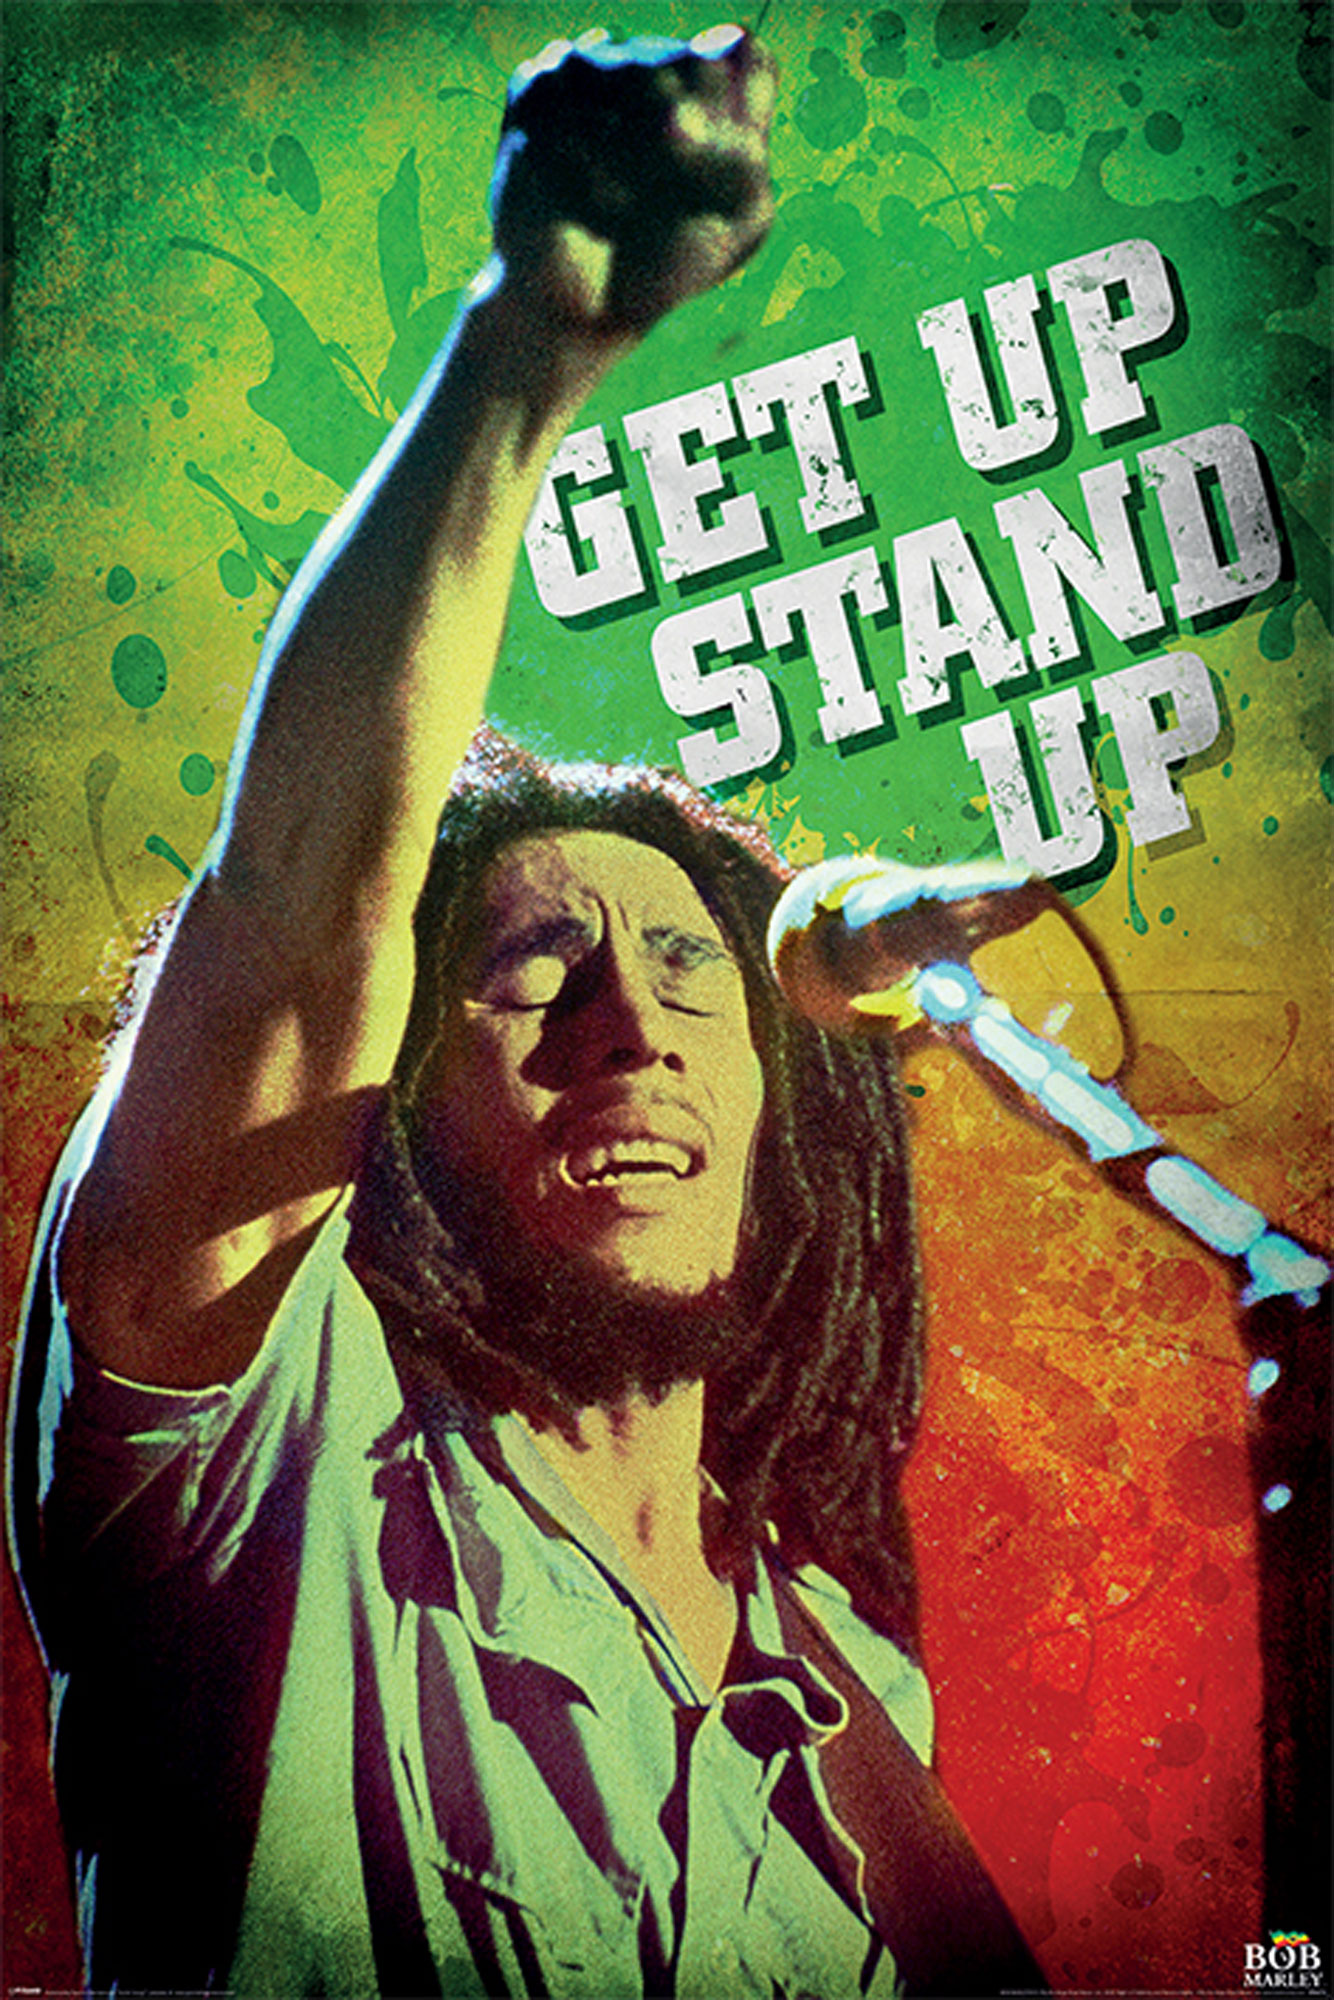 Up Get Up Stand Marley, Bob -